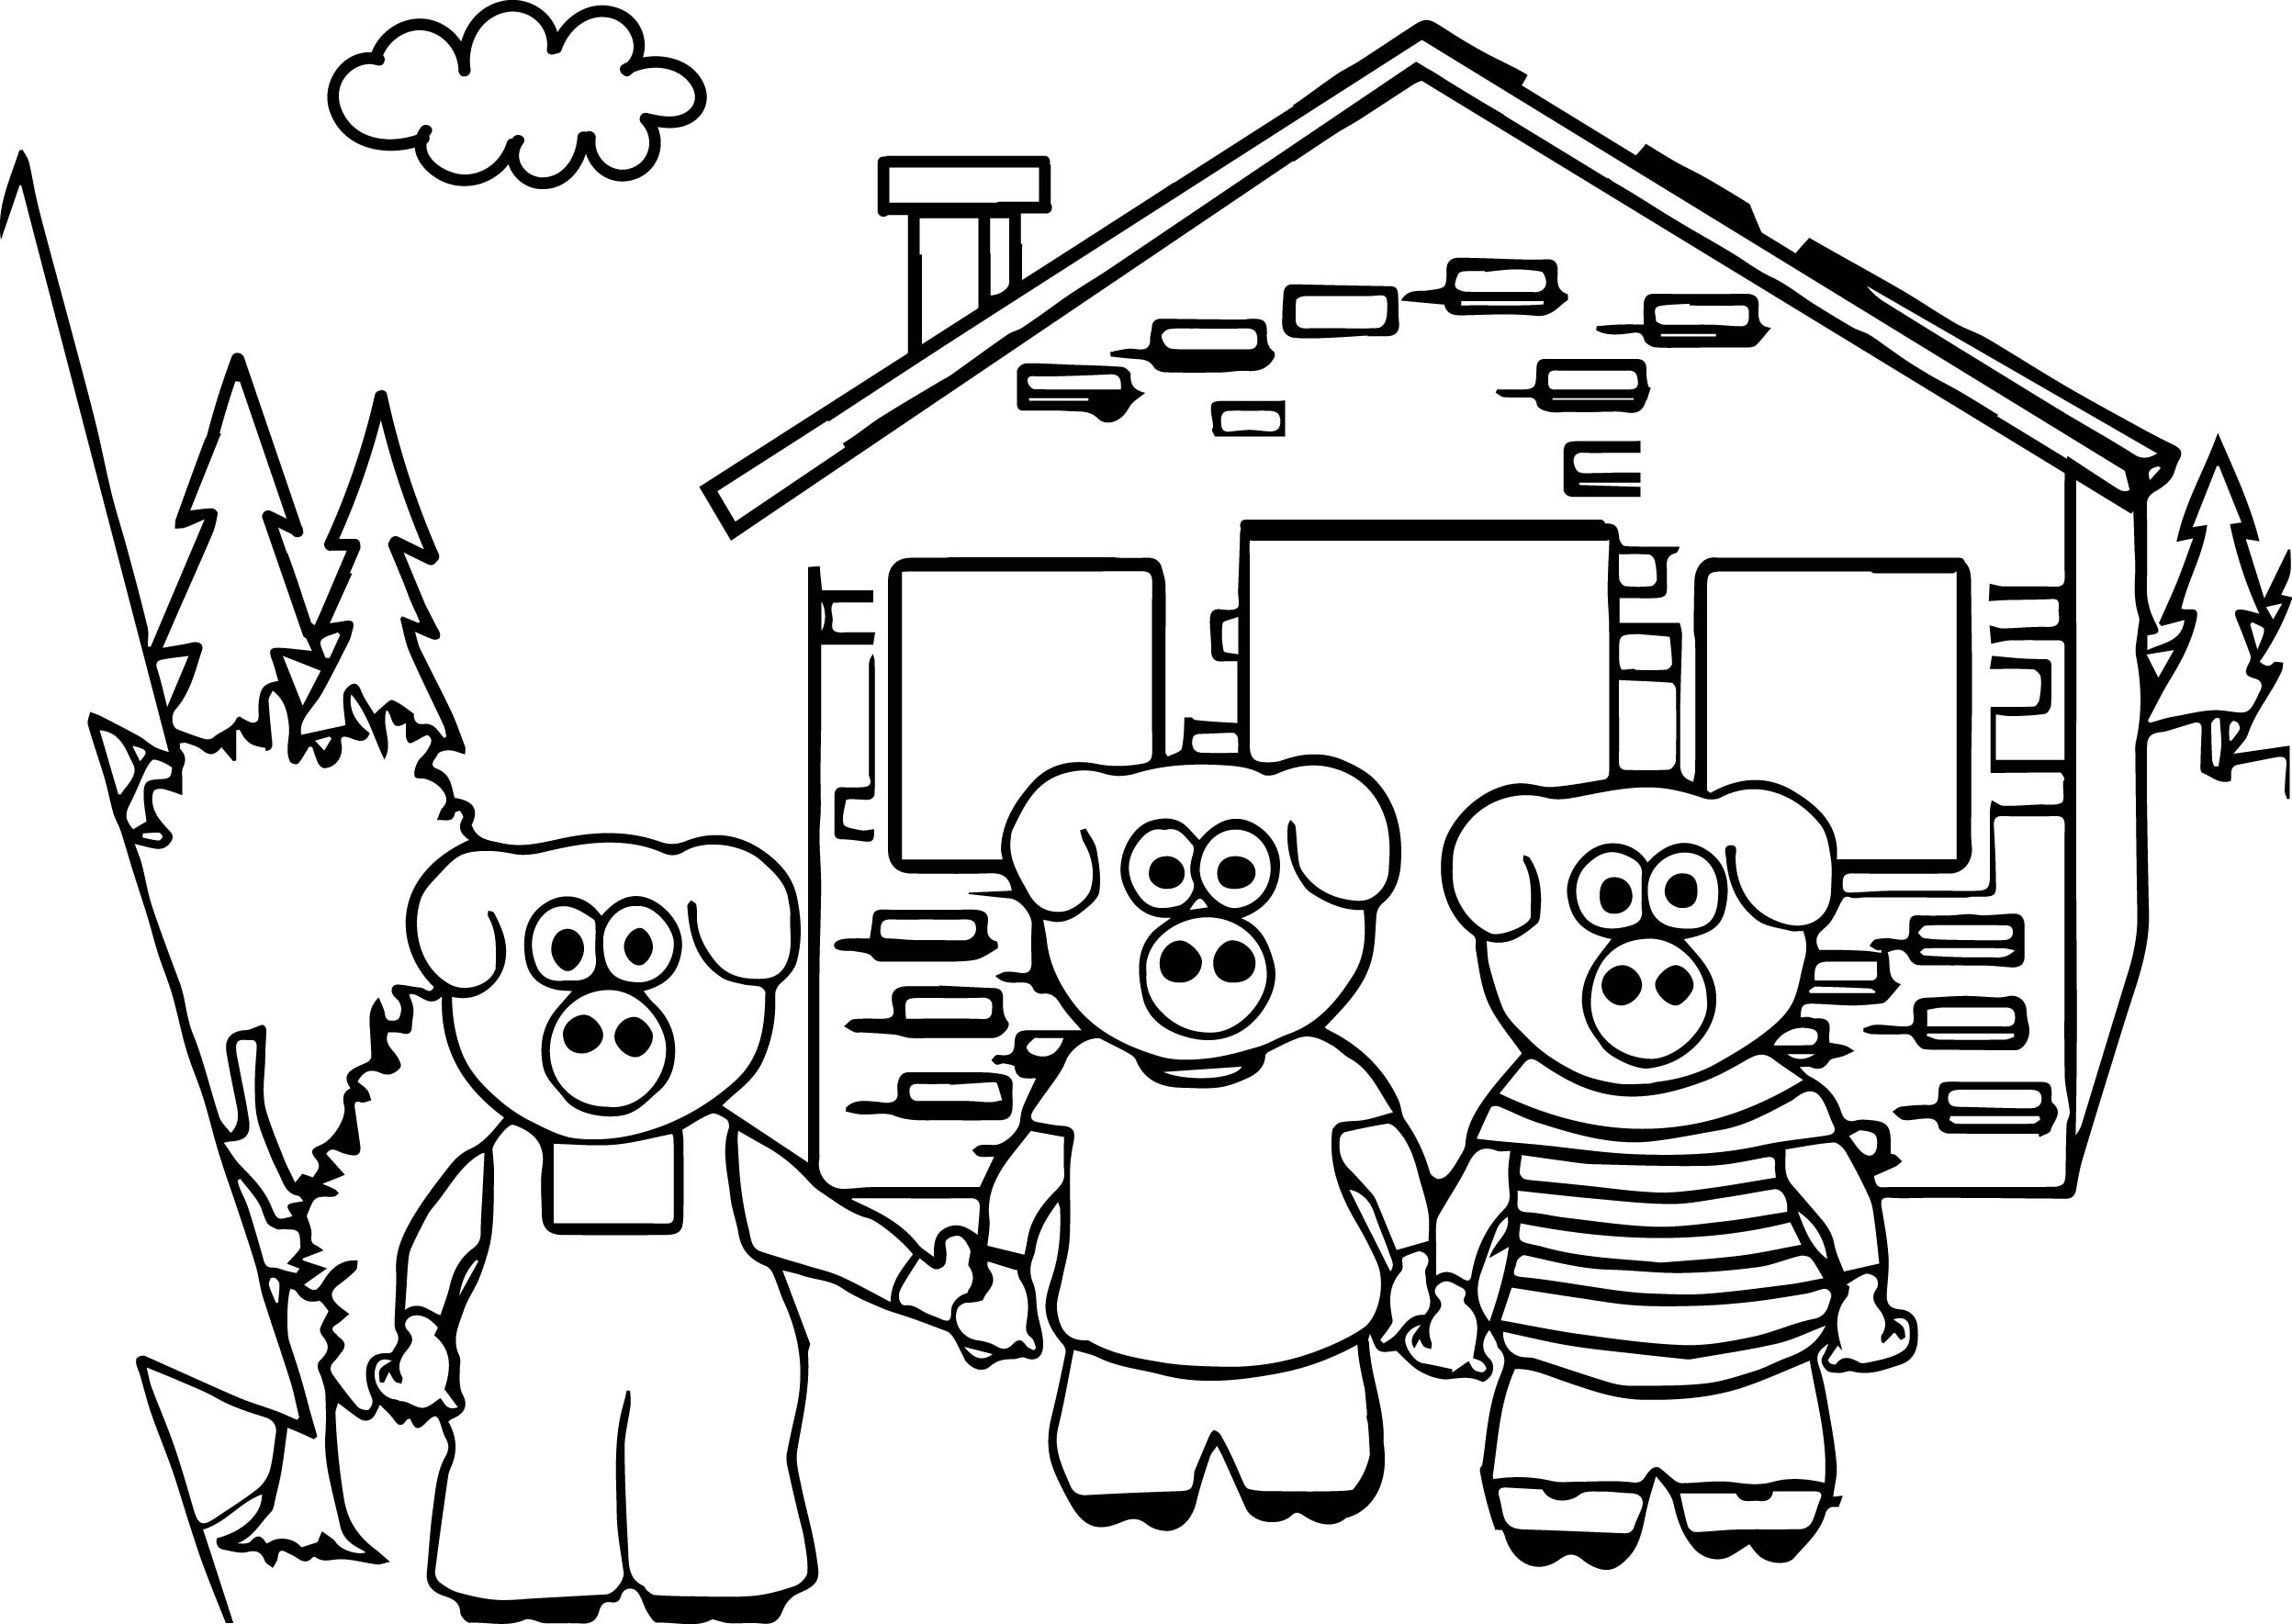 Preschool Coloring Sheets For The 3 Little Pigs Wolf
 Keys To Literacy Three Little Pigs Coloring Page